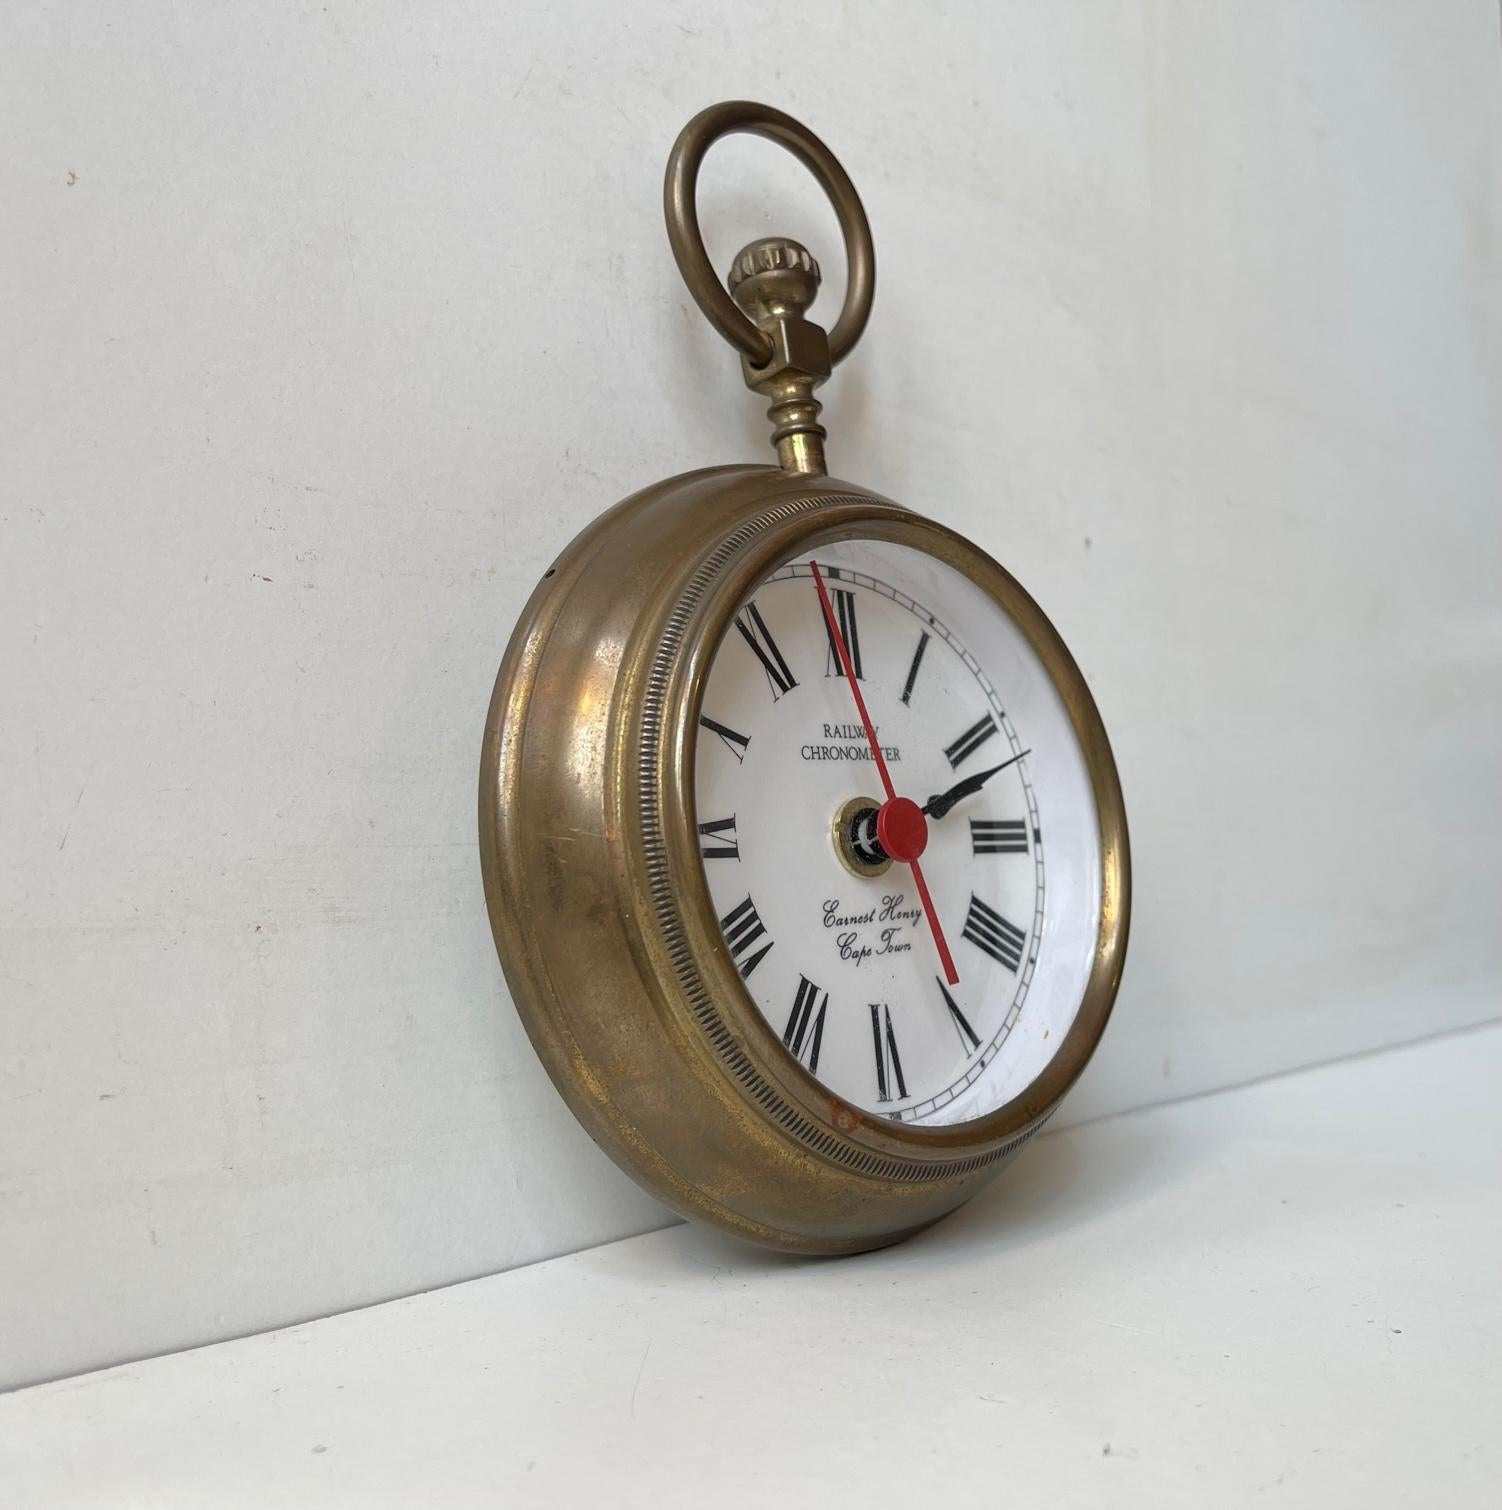 South African Vintage Railway Chronometer - Brass Jumbo Pocket Watch or Wall Clock For Sale